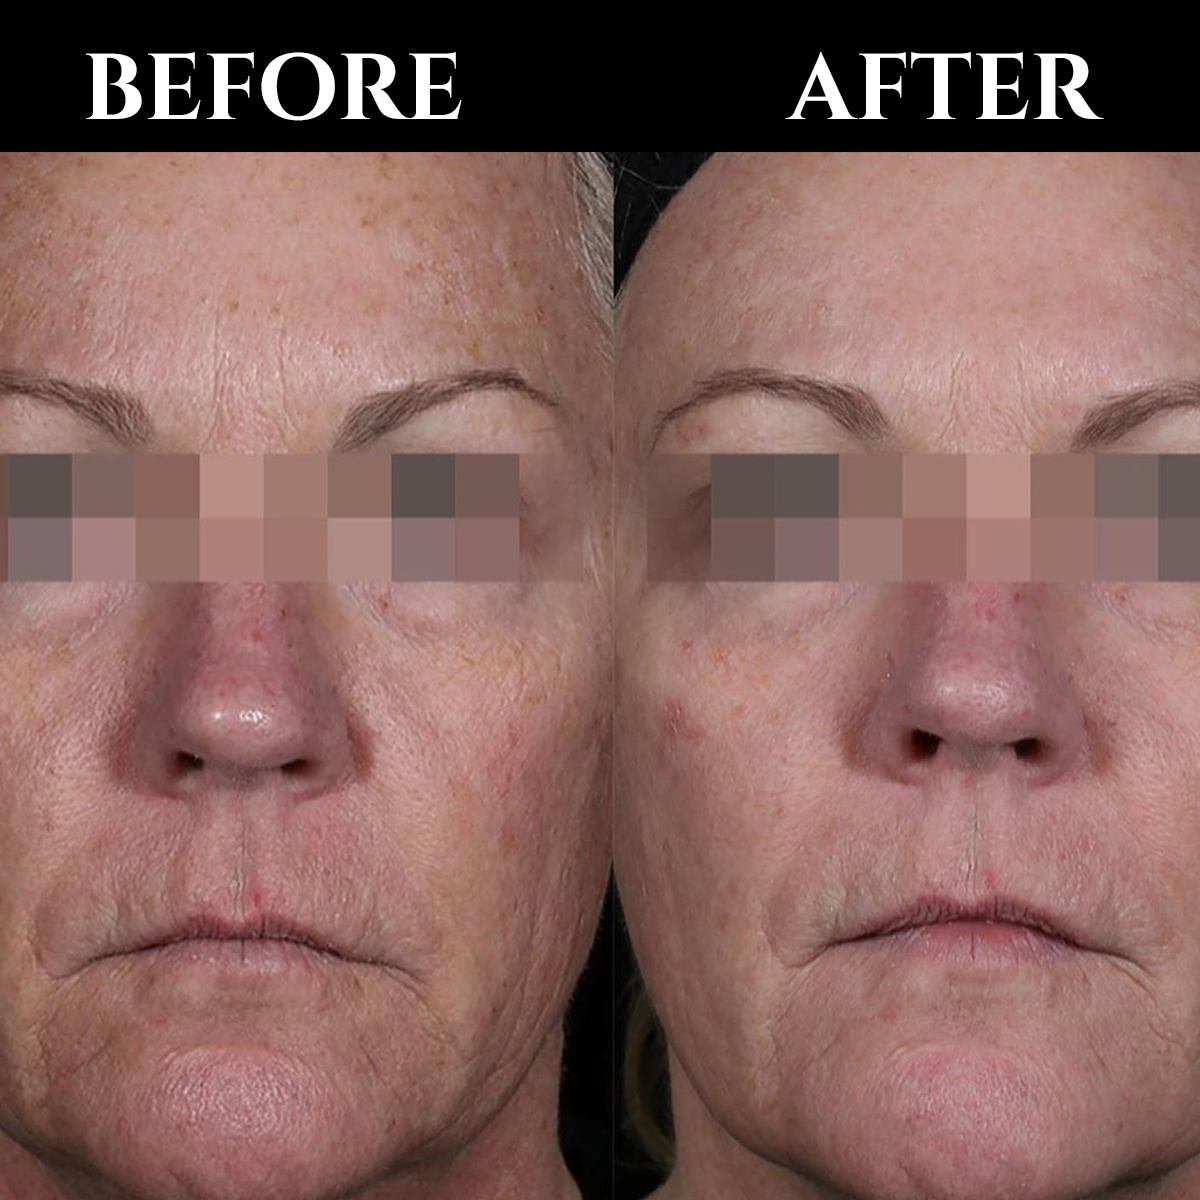 ✨How can we get a rejuvenated skin? Let's talk about rejuvenating & revitalizing. Check out this before and after with 3 PICO GENESIS TREATMENTS#CuteraAnz Credits: cutera.anz #Cutera #beauty